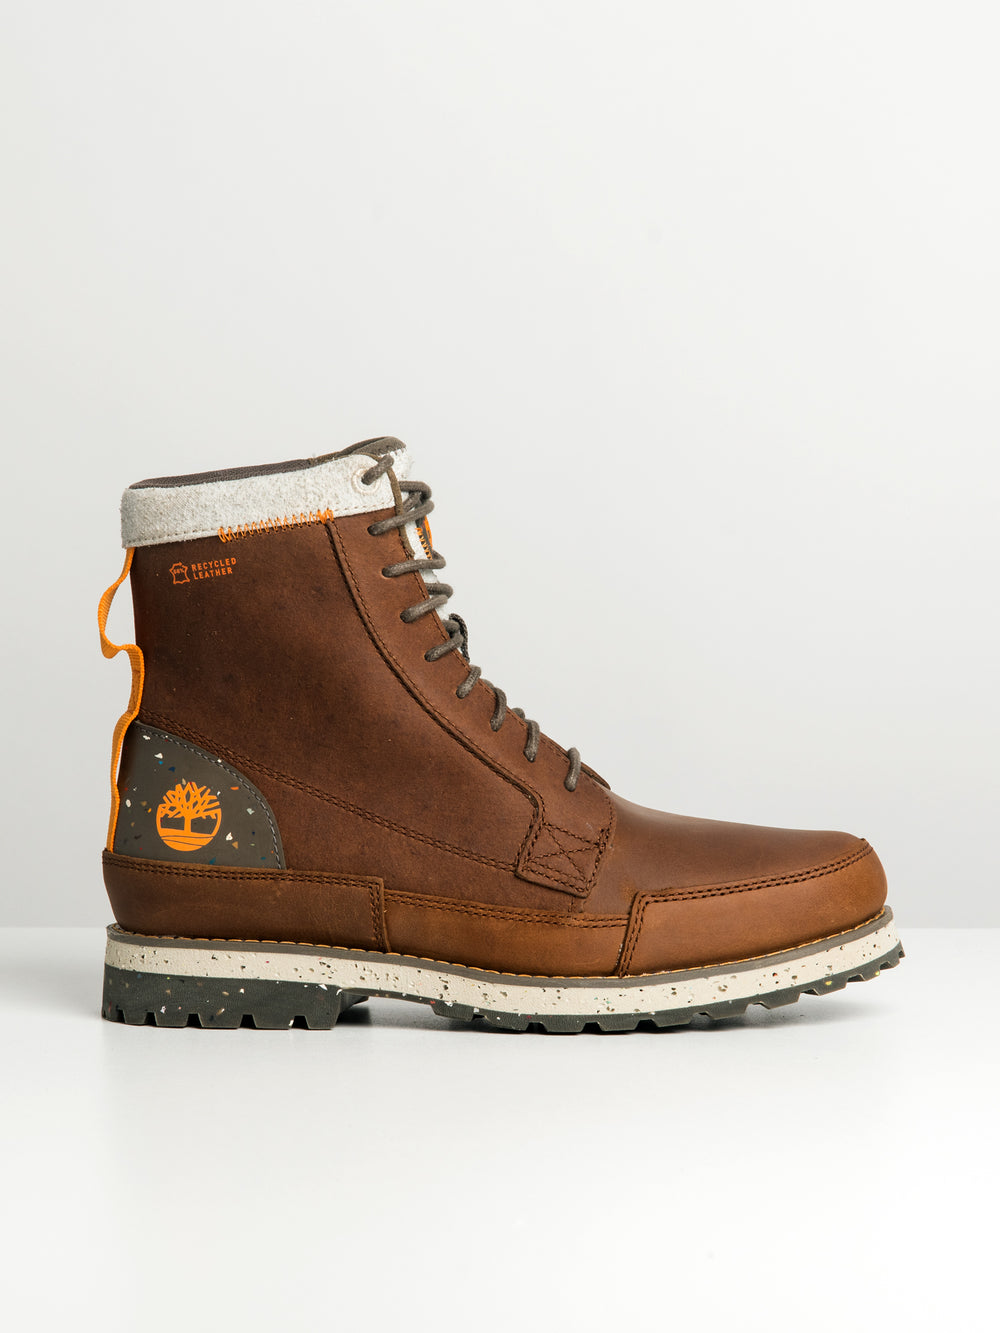 BOTTES TIMBERLAND TIMBERCYCLE POUR HOMMES - LIQUIDATION